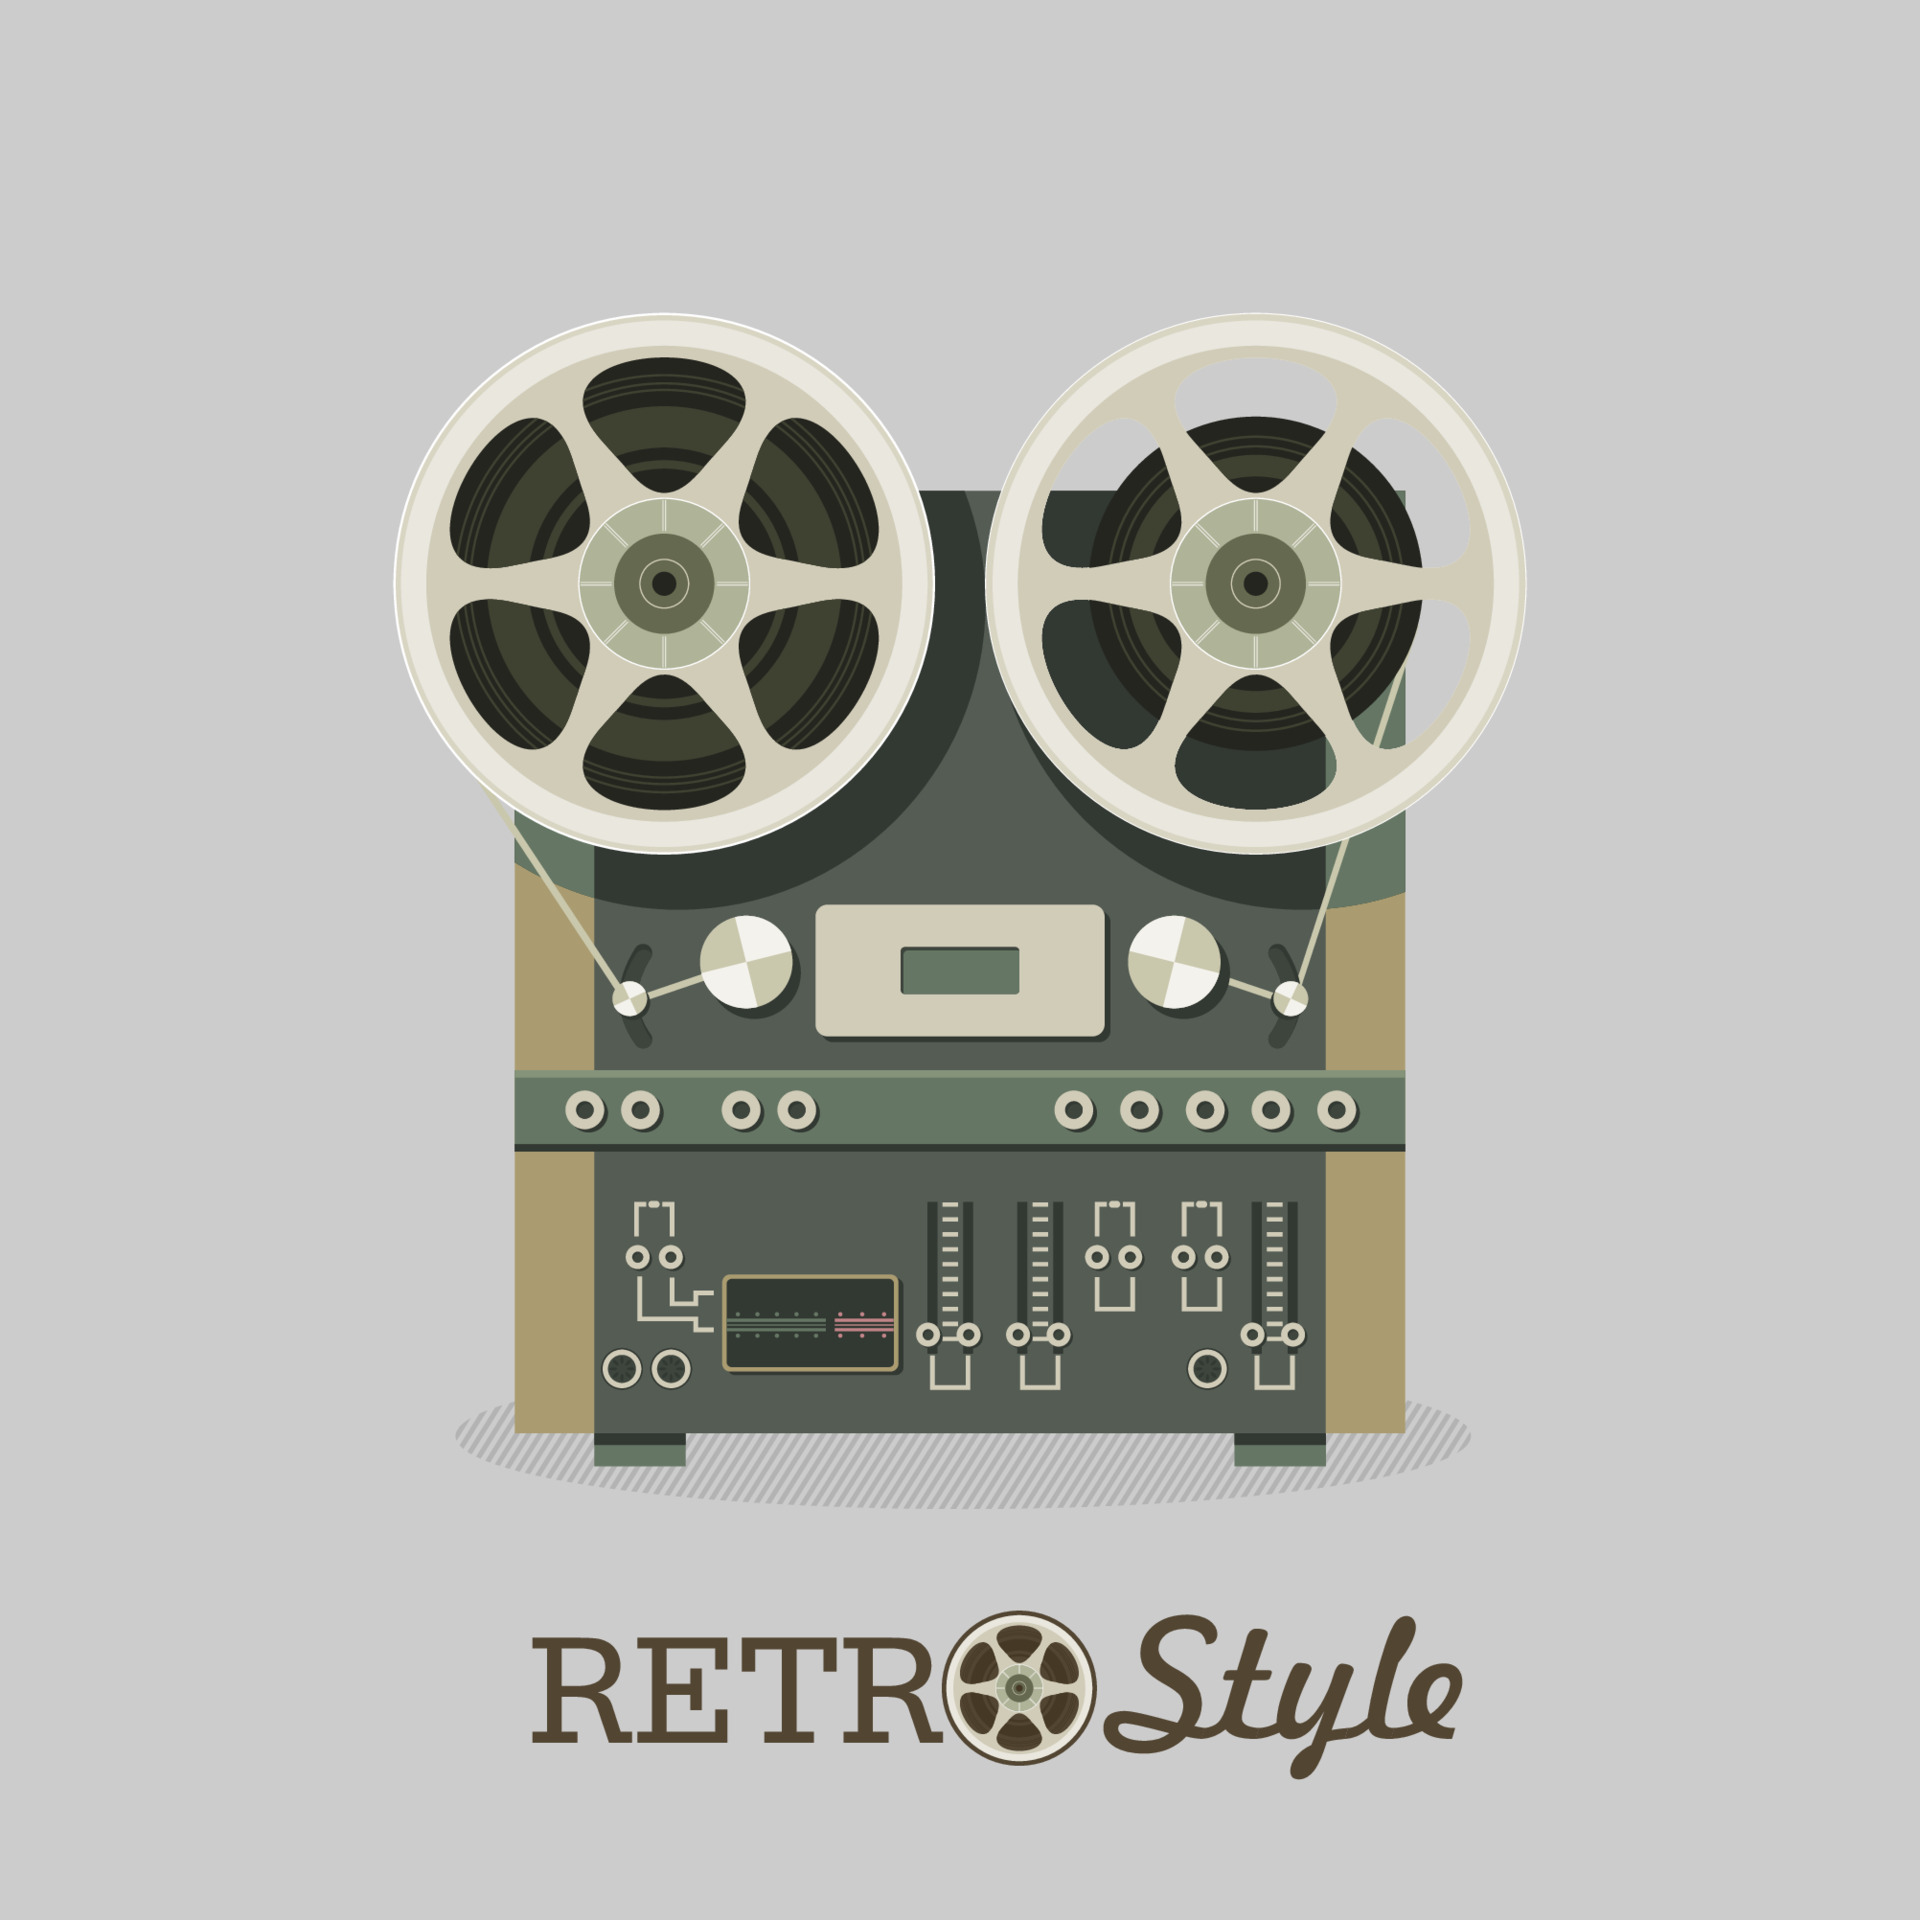 https://static.vecteezy.com/system/resources/previews/005/657/060/original/vintage-reel-to-reel-tape-recorder-logo-icon-illustration-in-retro-style-vector.jpg